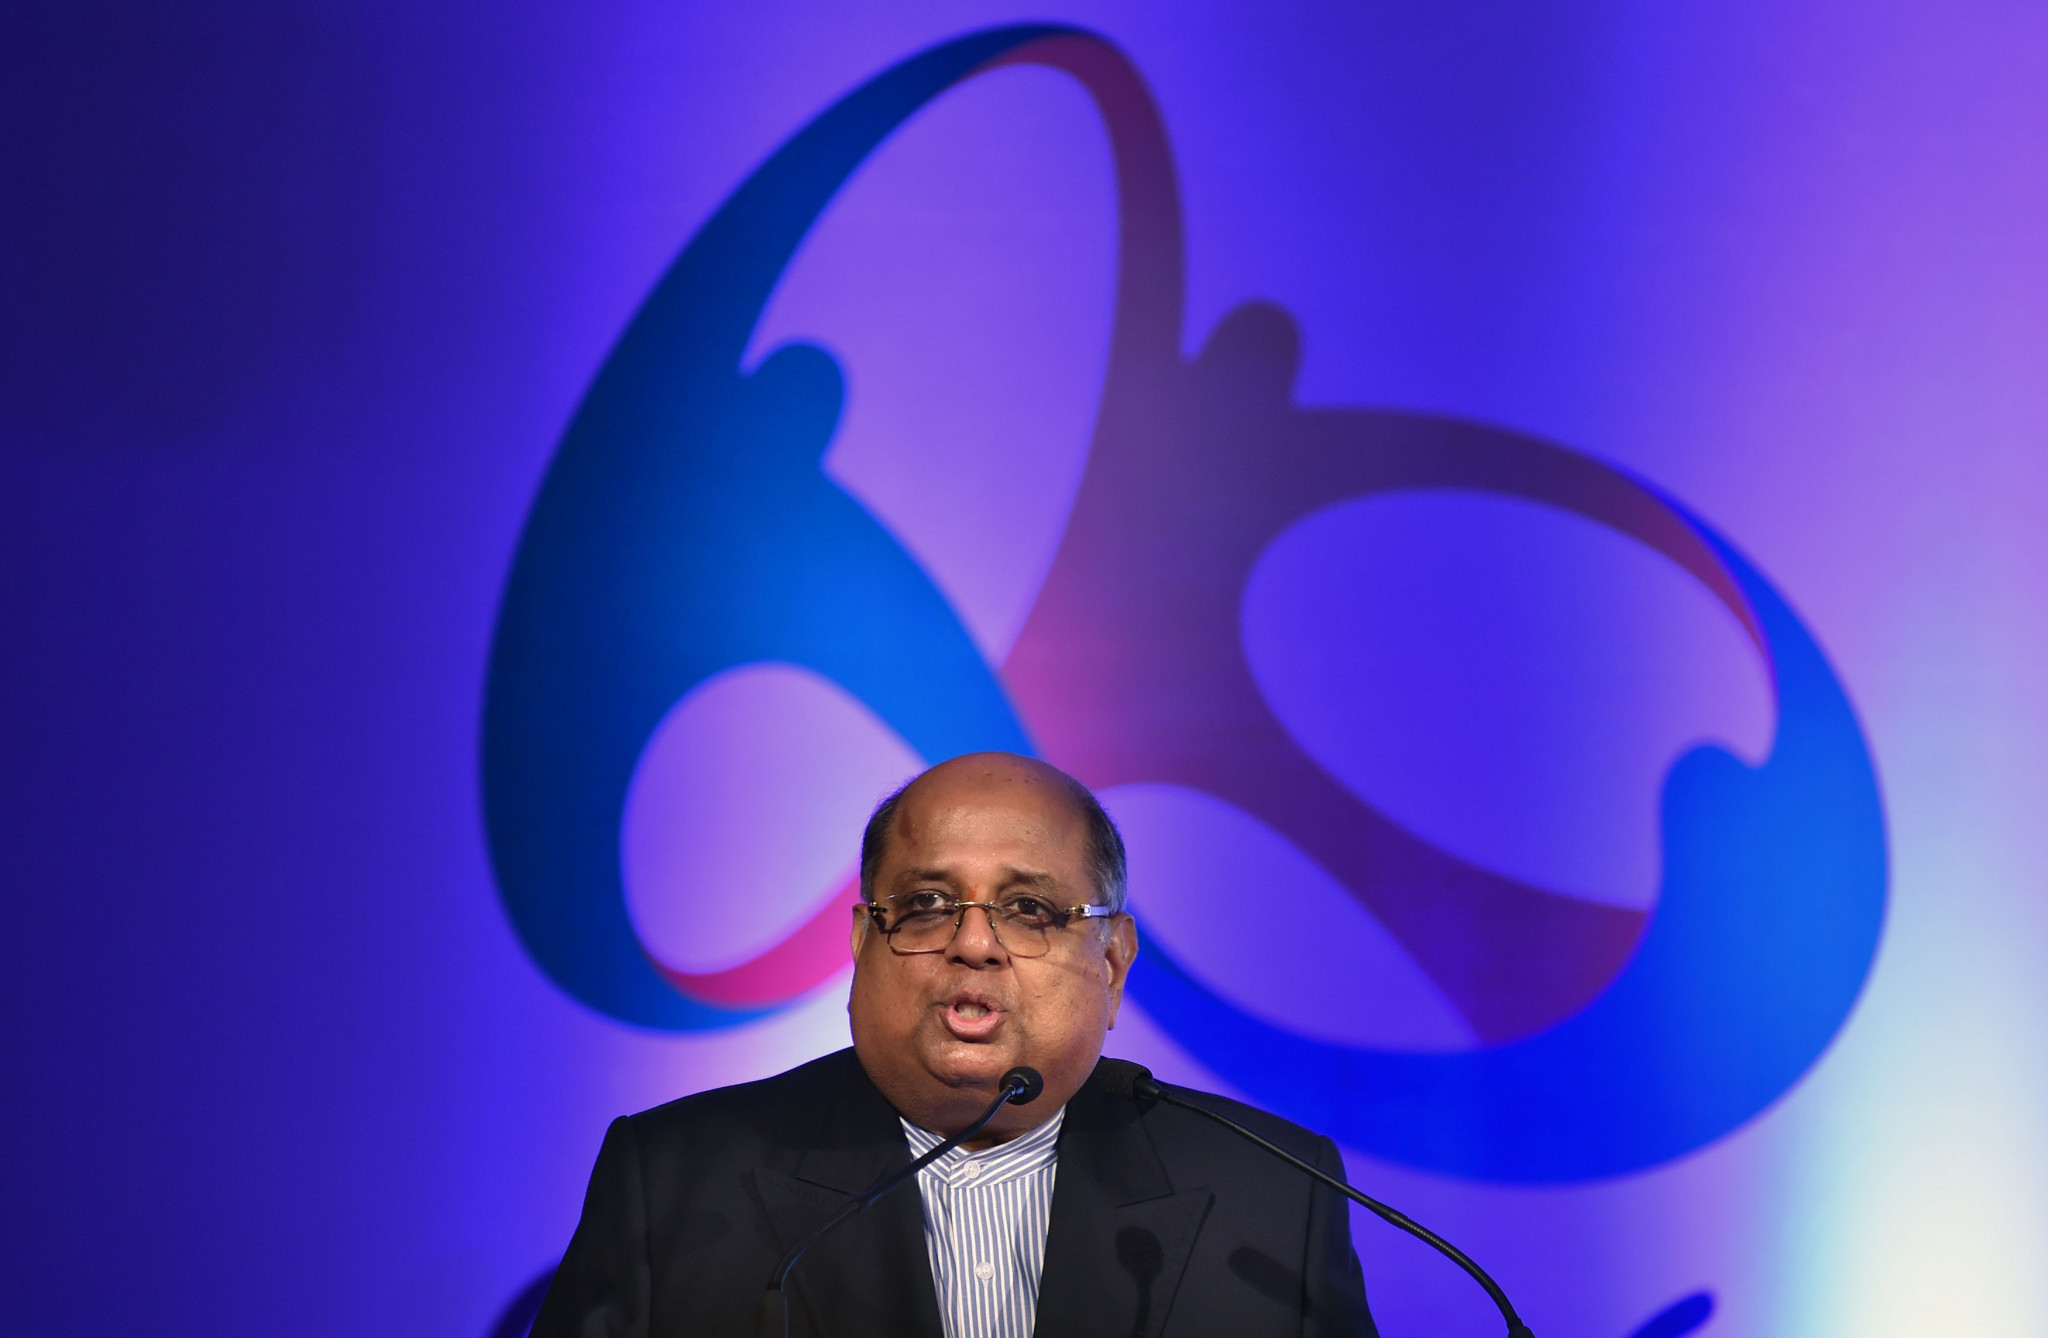 N. Ramachandran has not decided whether to seek a second term as President of the Indian Olympic Association ©Getty Images